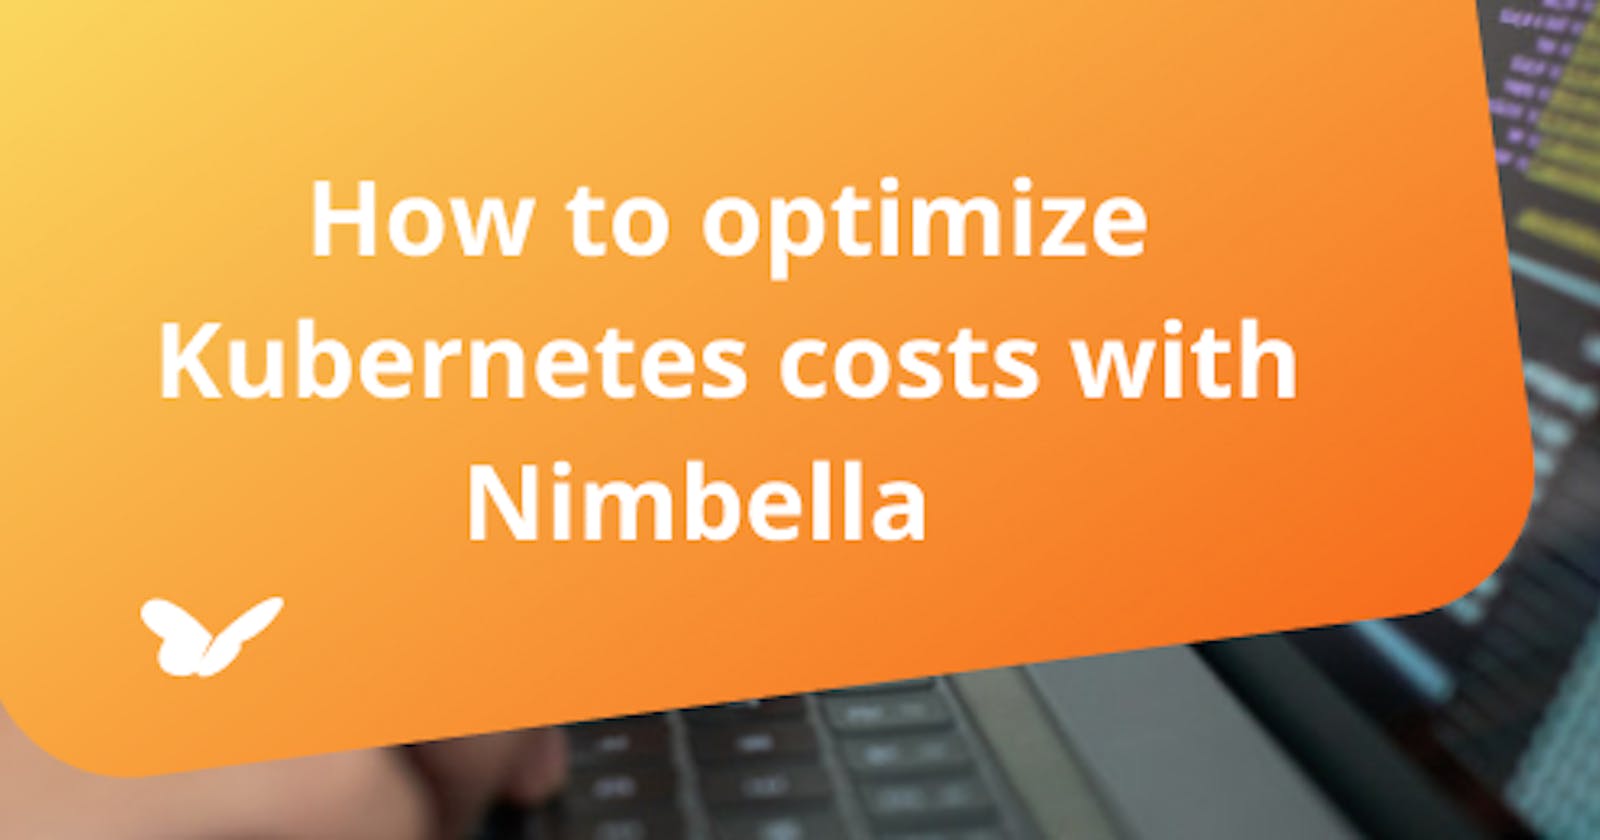 How to optimize Kubernetes costs with Nimbella